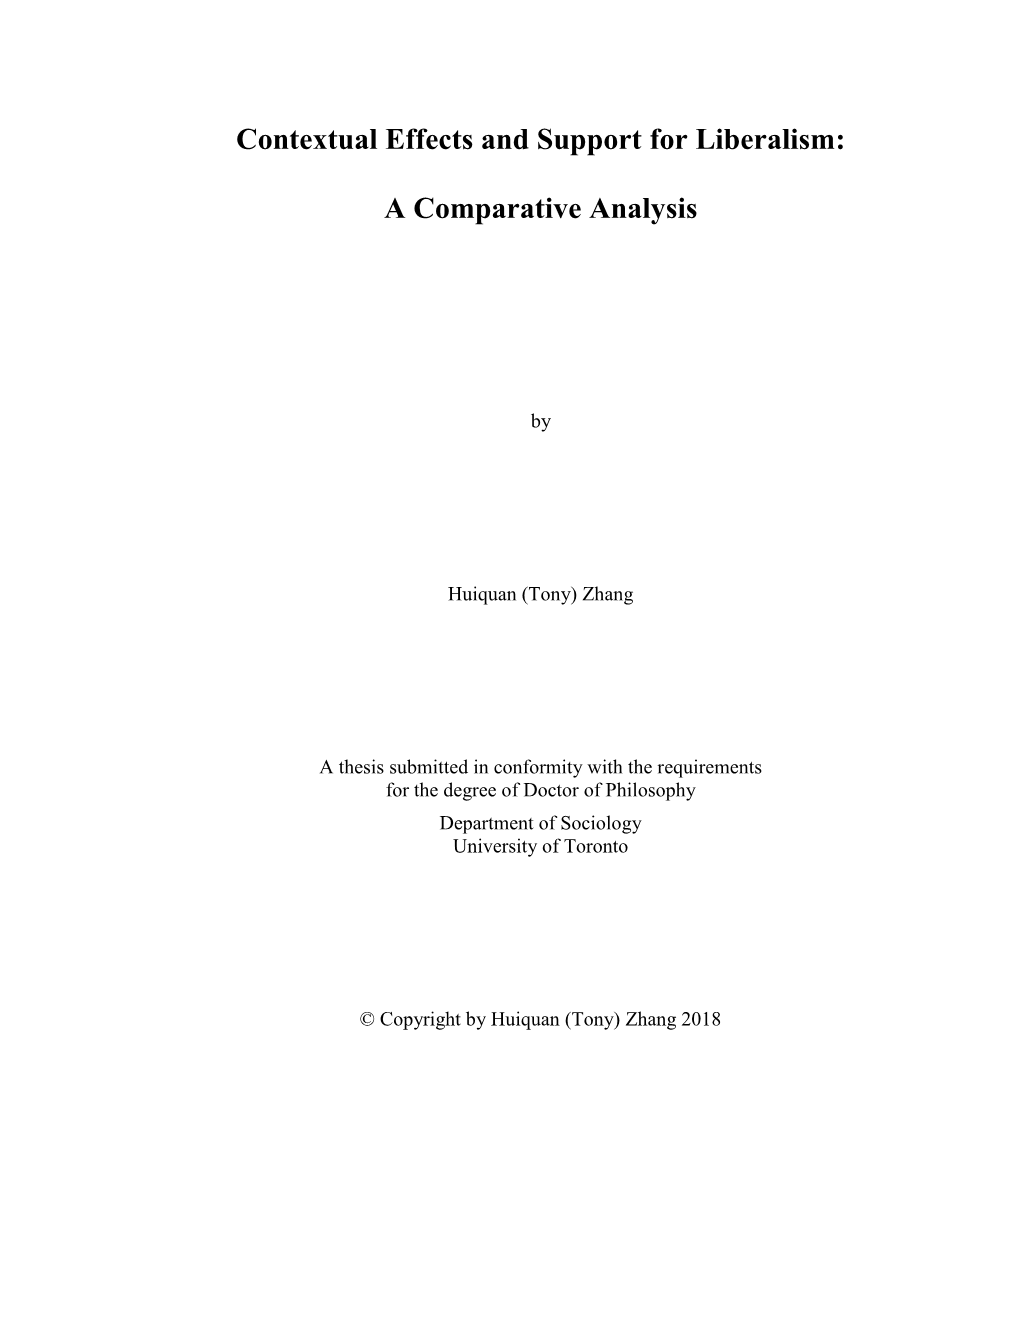 Contextual Effects and Support for Liberalism: a Comparative Analysis